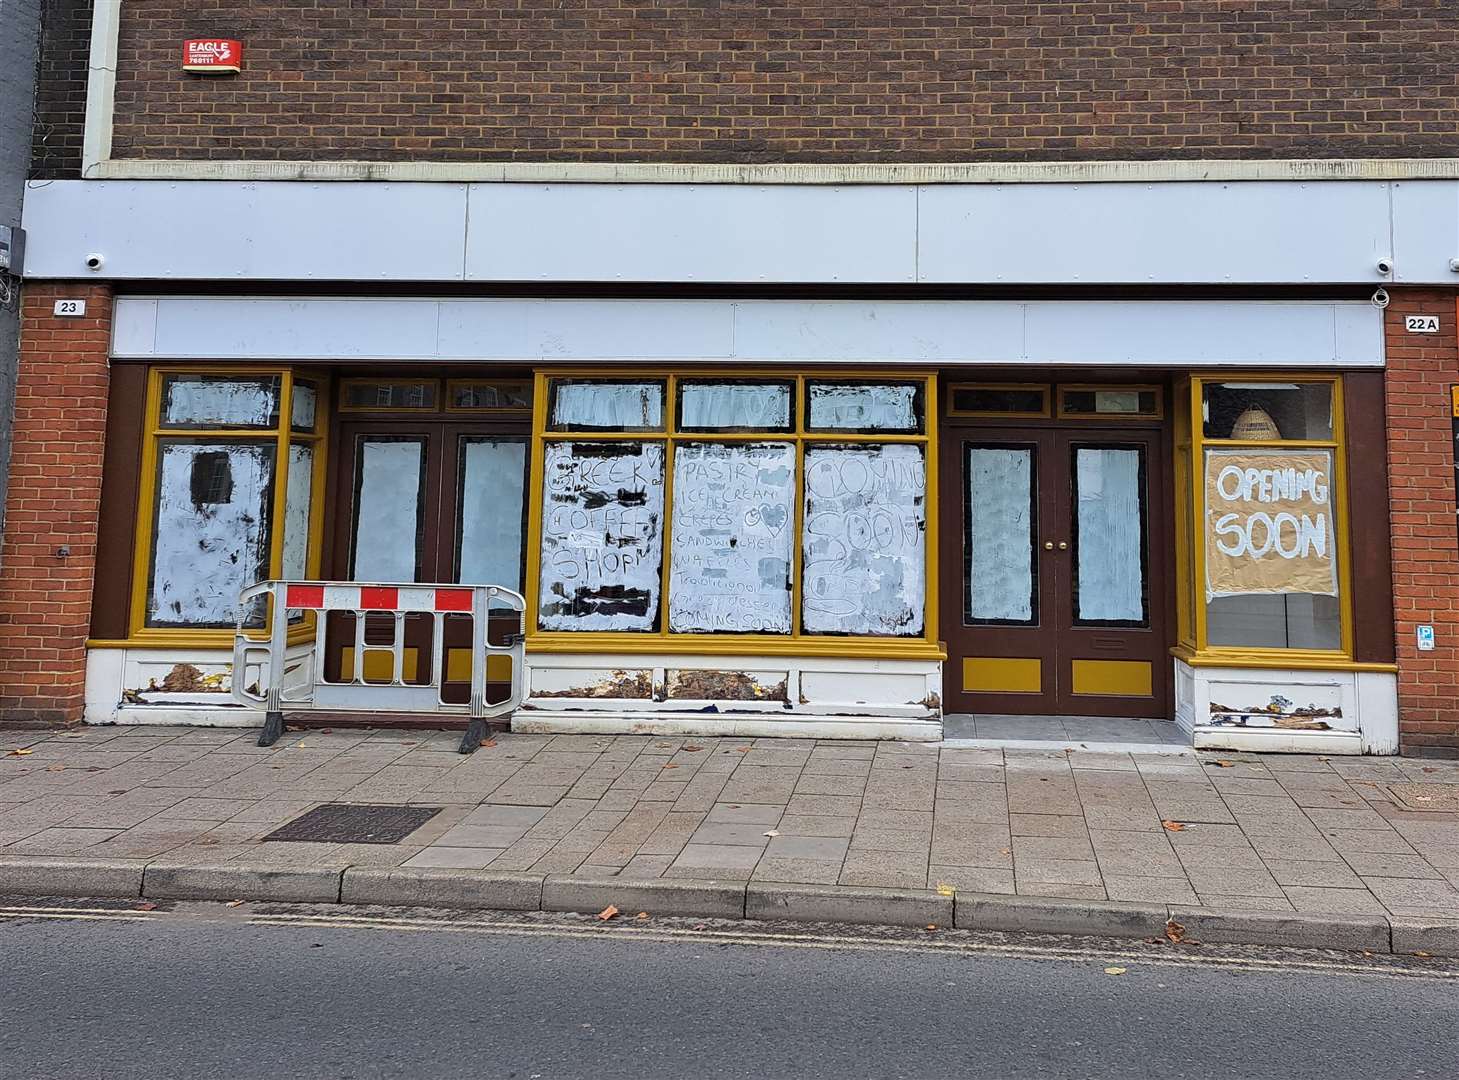 Work is currently underway to get the cafe into shape for opening day